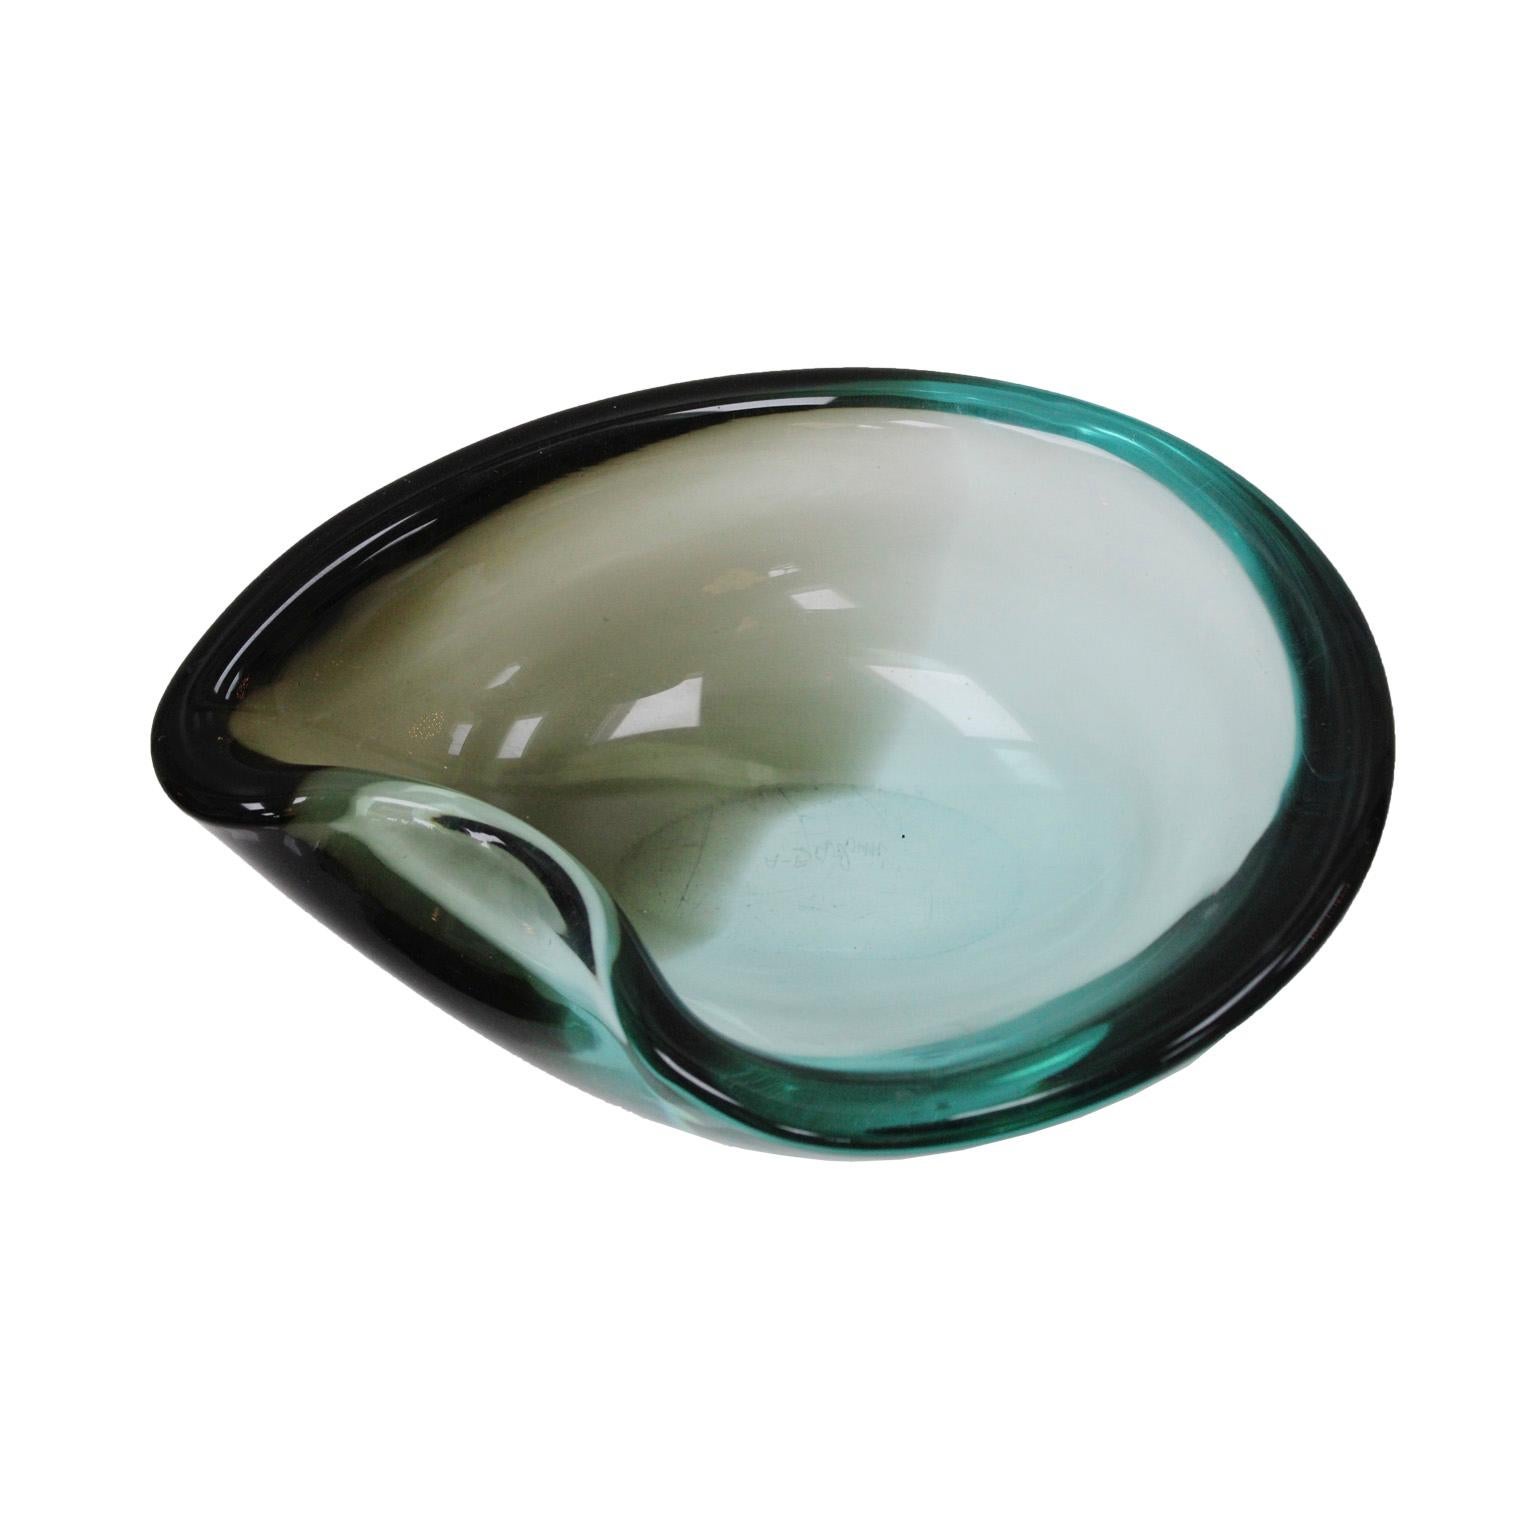 Italian Mid-Century Modern Black and Blue Murano Glass Bowl 1970 For Sale